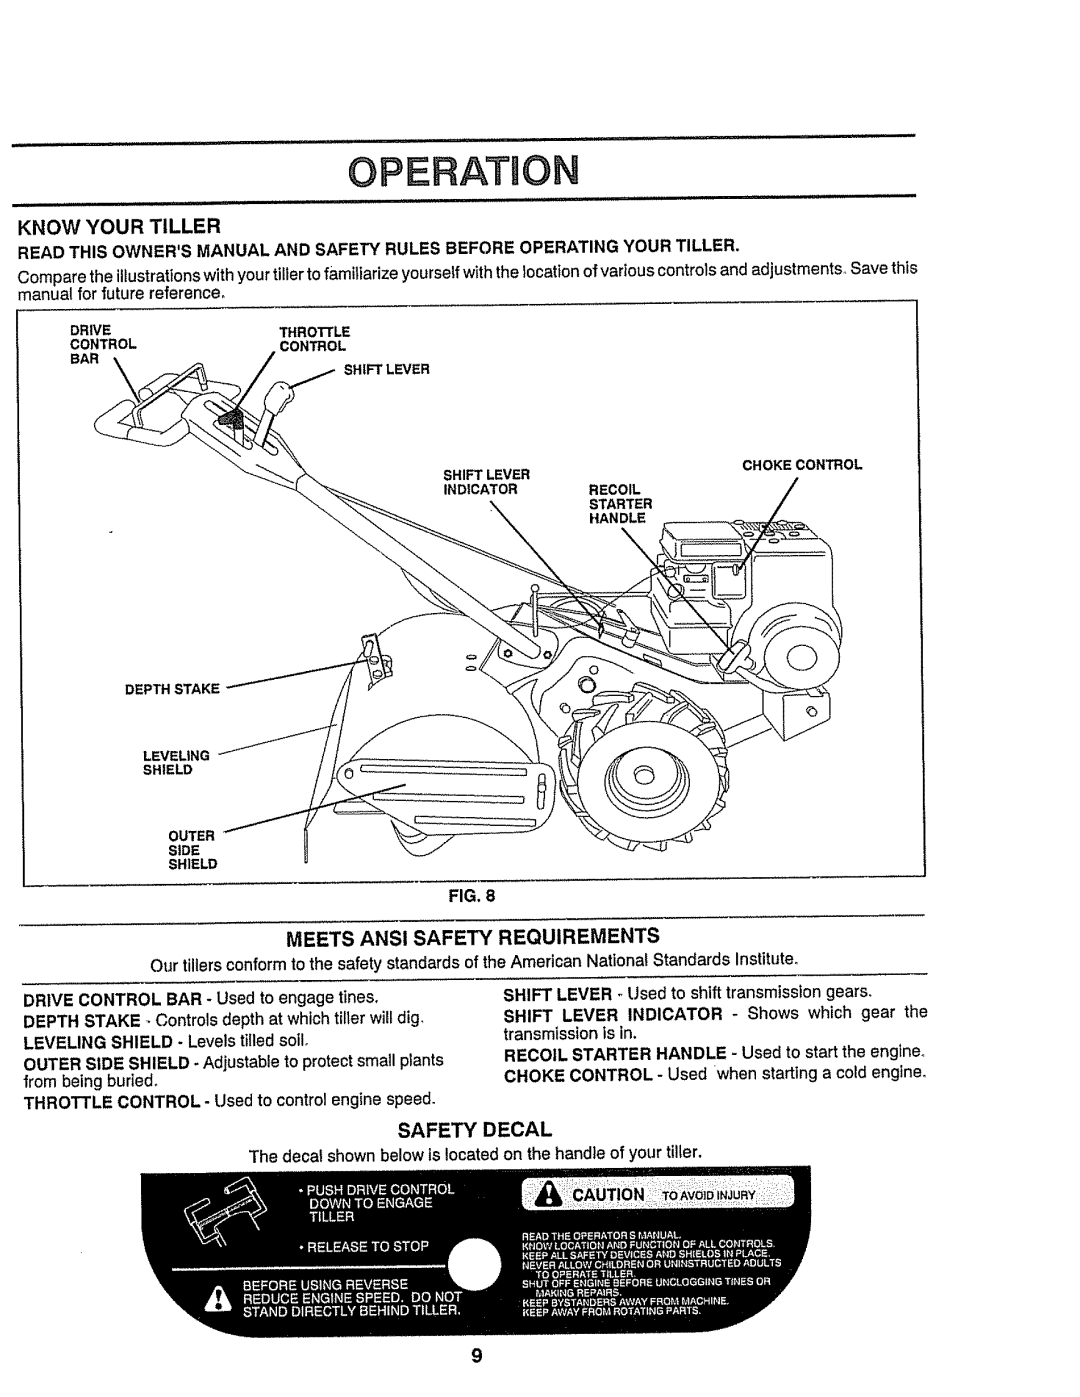 Craftsman 917-299751 owner manual Operation, Meets Ansi Safety Requirements, Safety Decal 